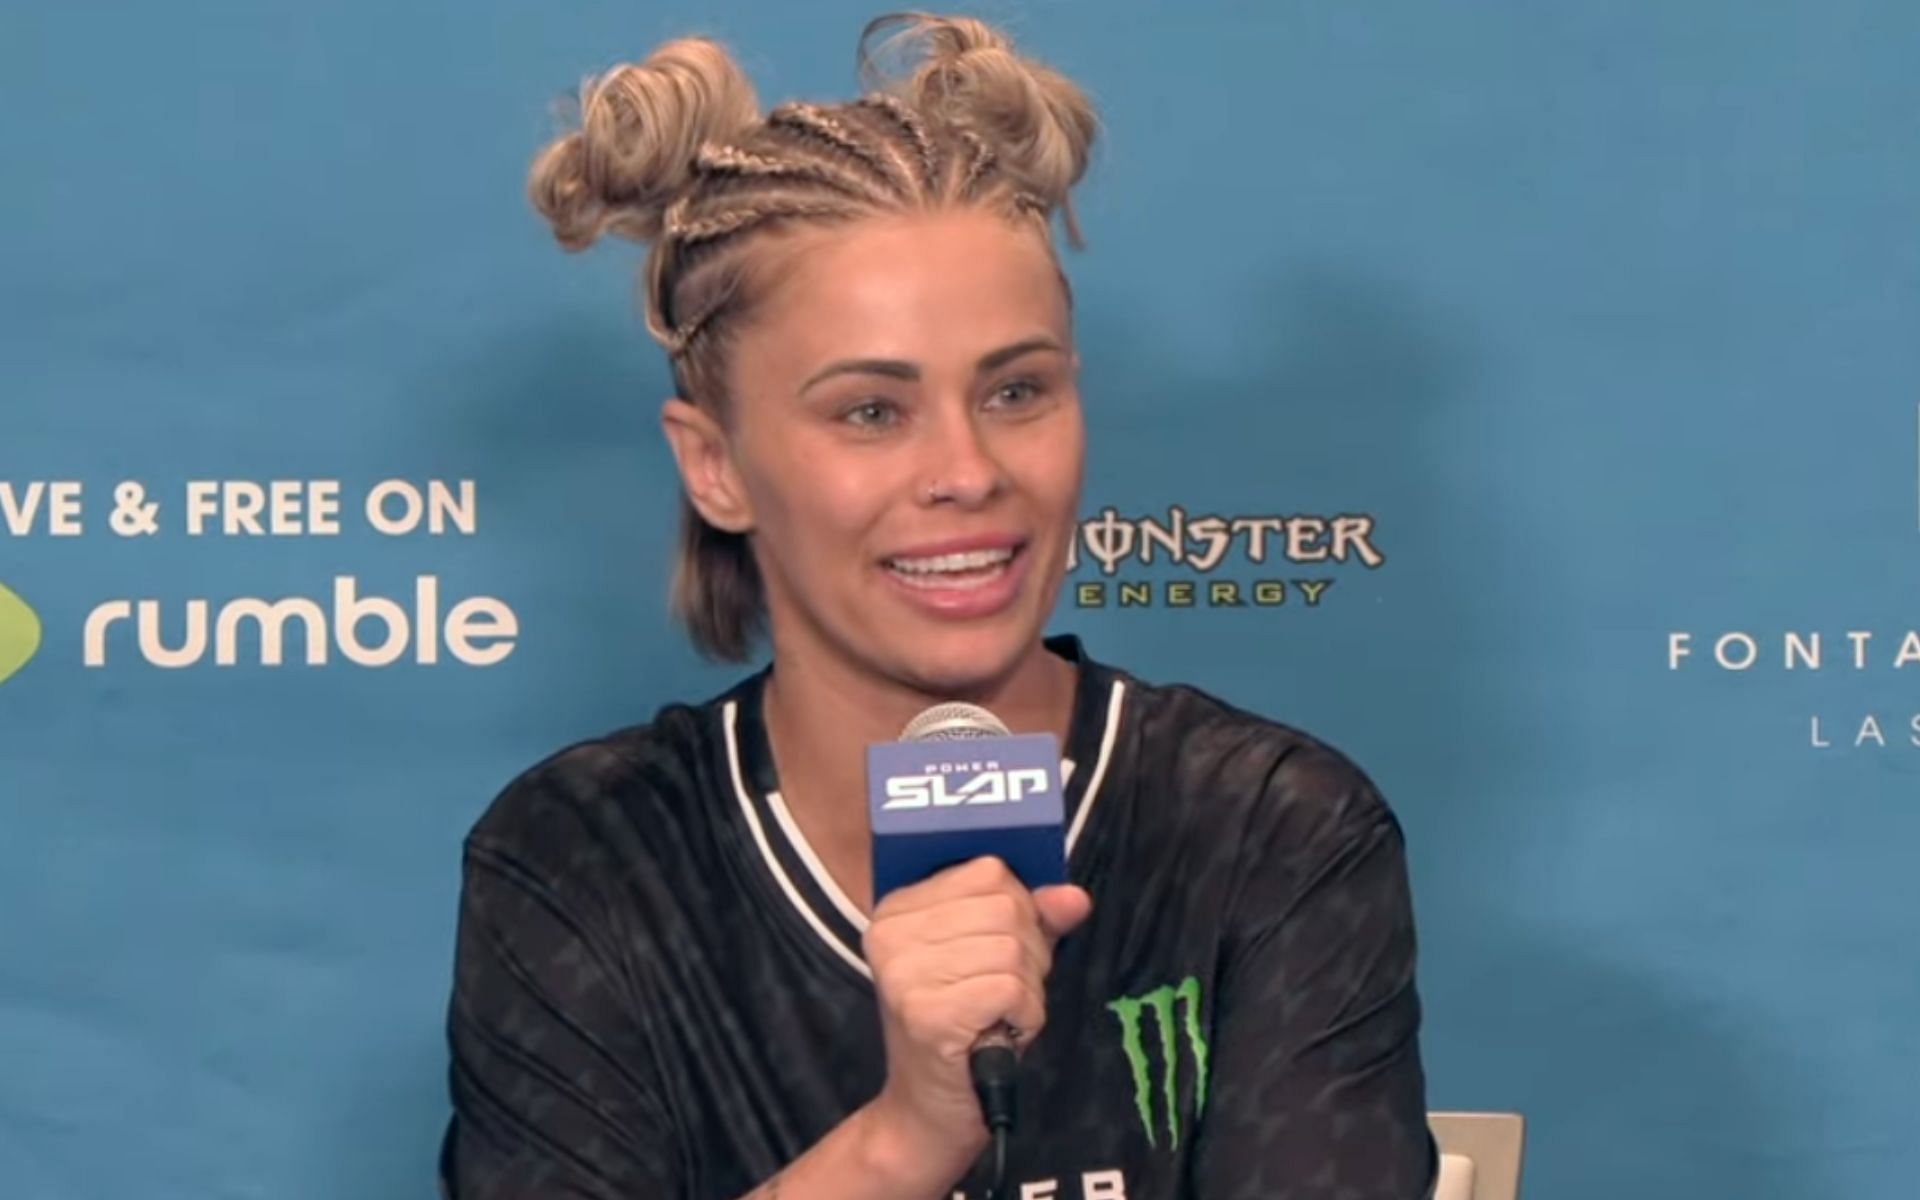 Paige VanZant (pictured) comments on her first Power Slap match. [Image courtesy: MMA Junkie on YouTube]